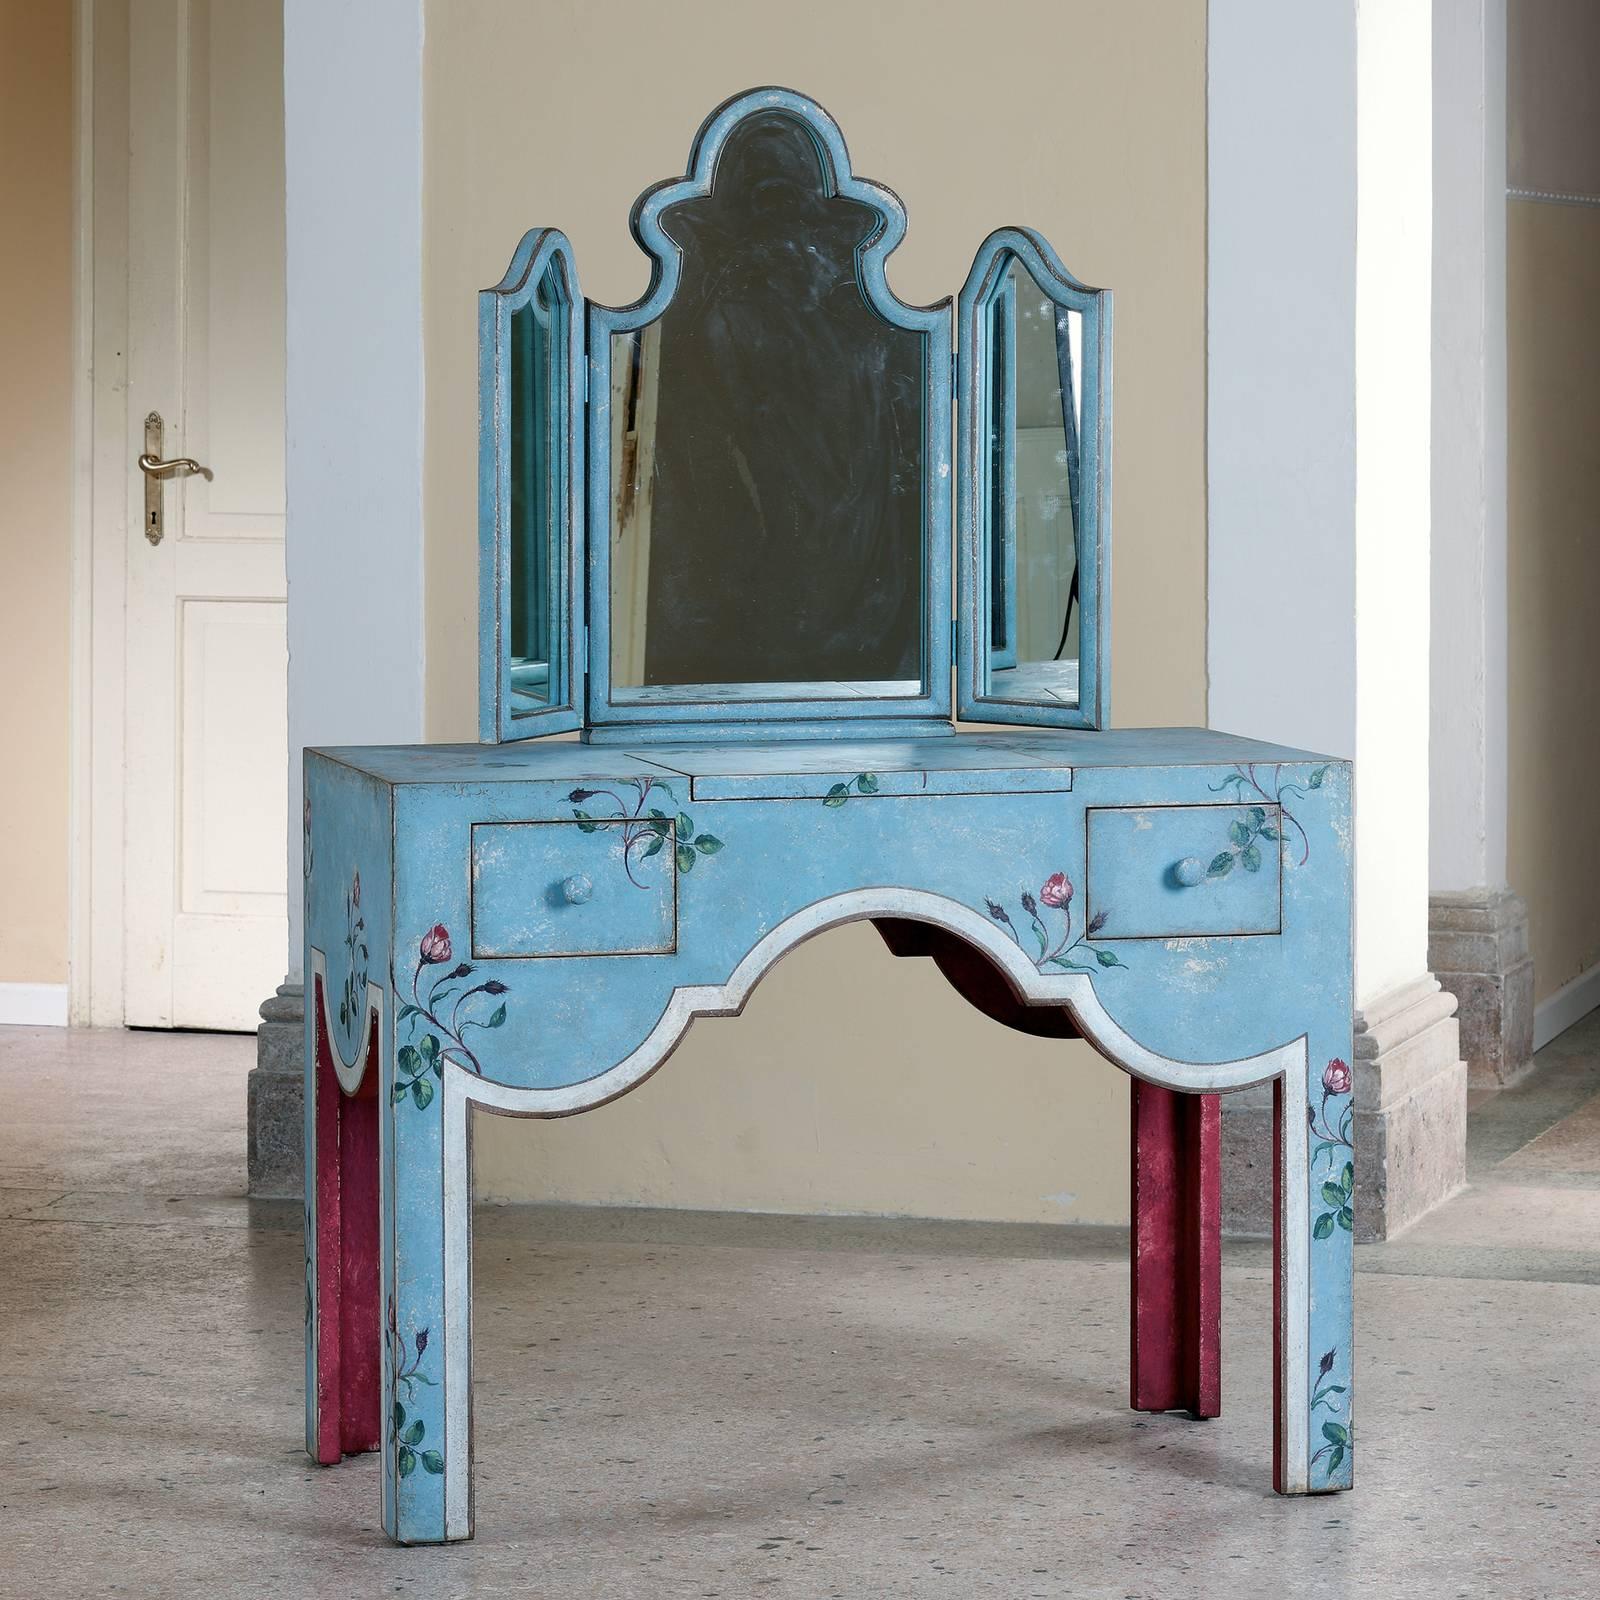 This sophisticated vanity is handcrafted in the classic 18th century Venetian style with precise attention to detail. Its distinctive elements of design include ornate floral decoration and rounded arches that evoke a persuasive, timeless allure.